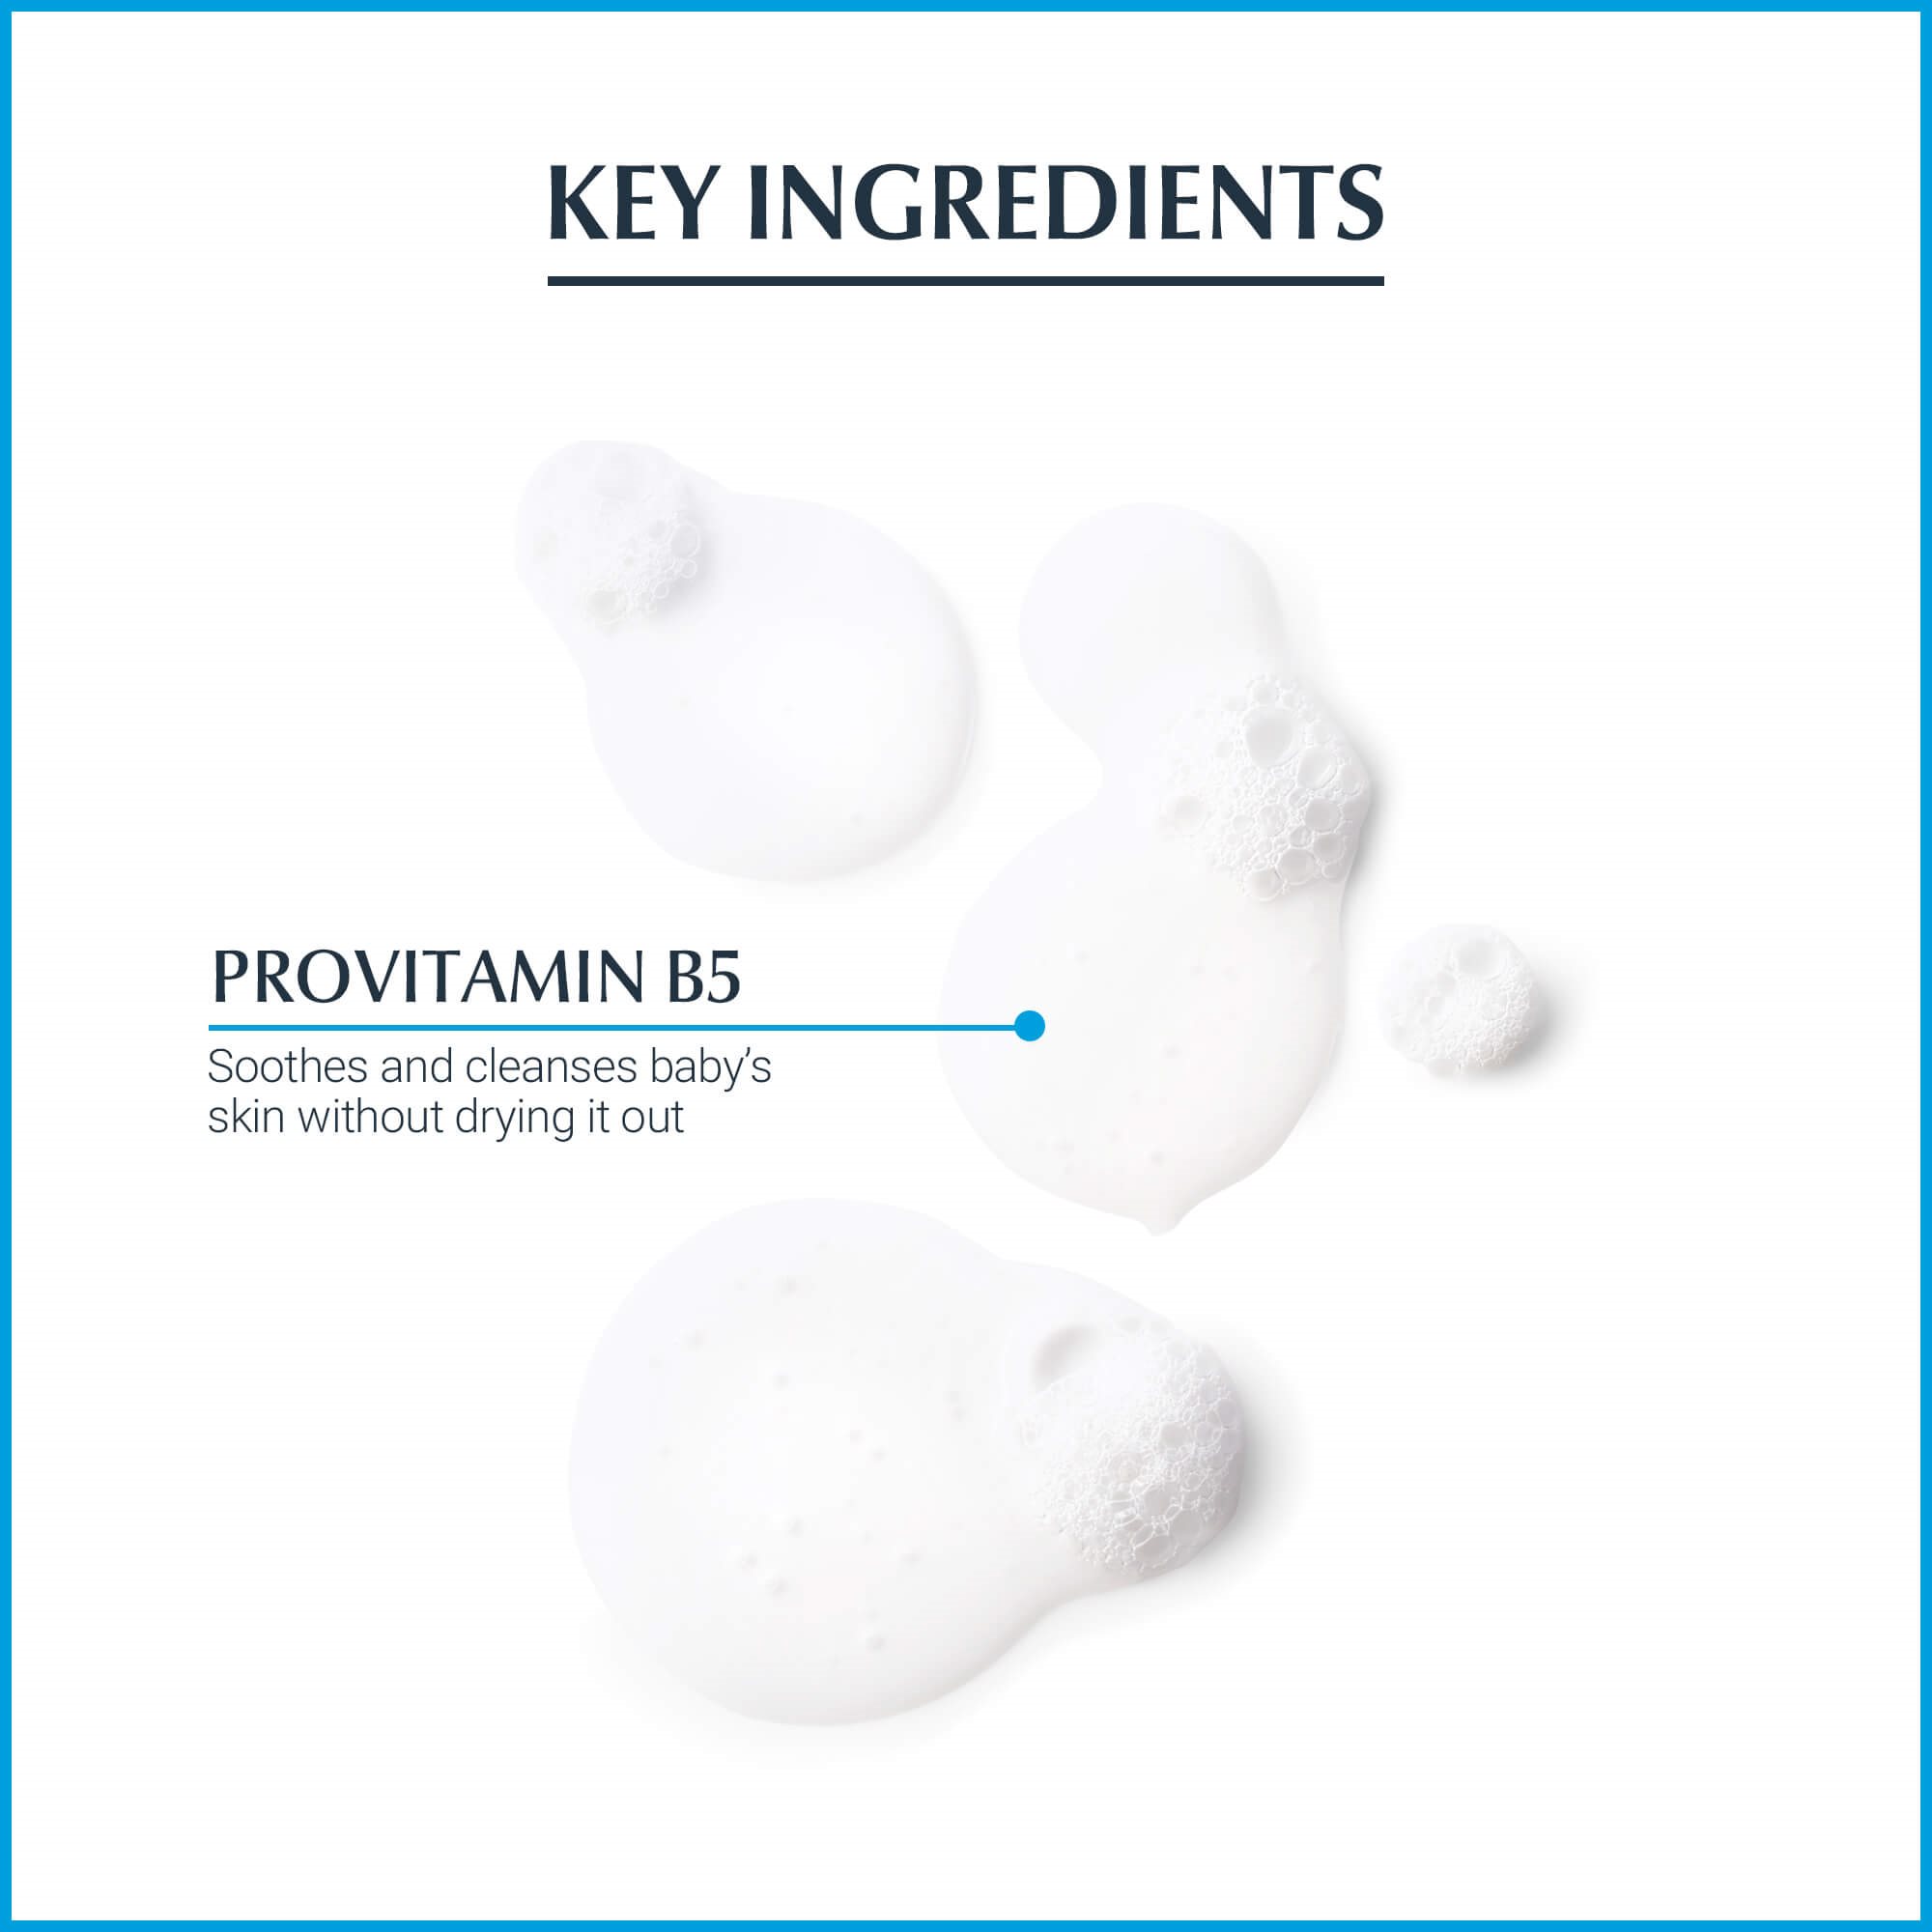 View of Eucerin Aquaphor baby wash and shampoo product key ingredients text with product splashed against a white background.